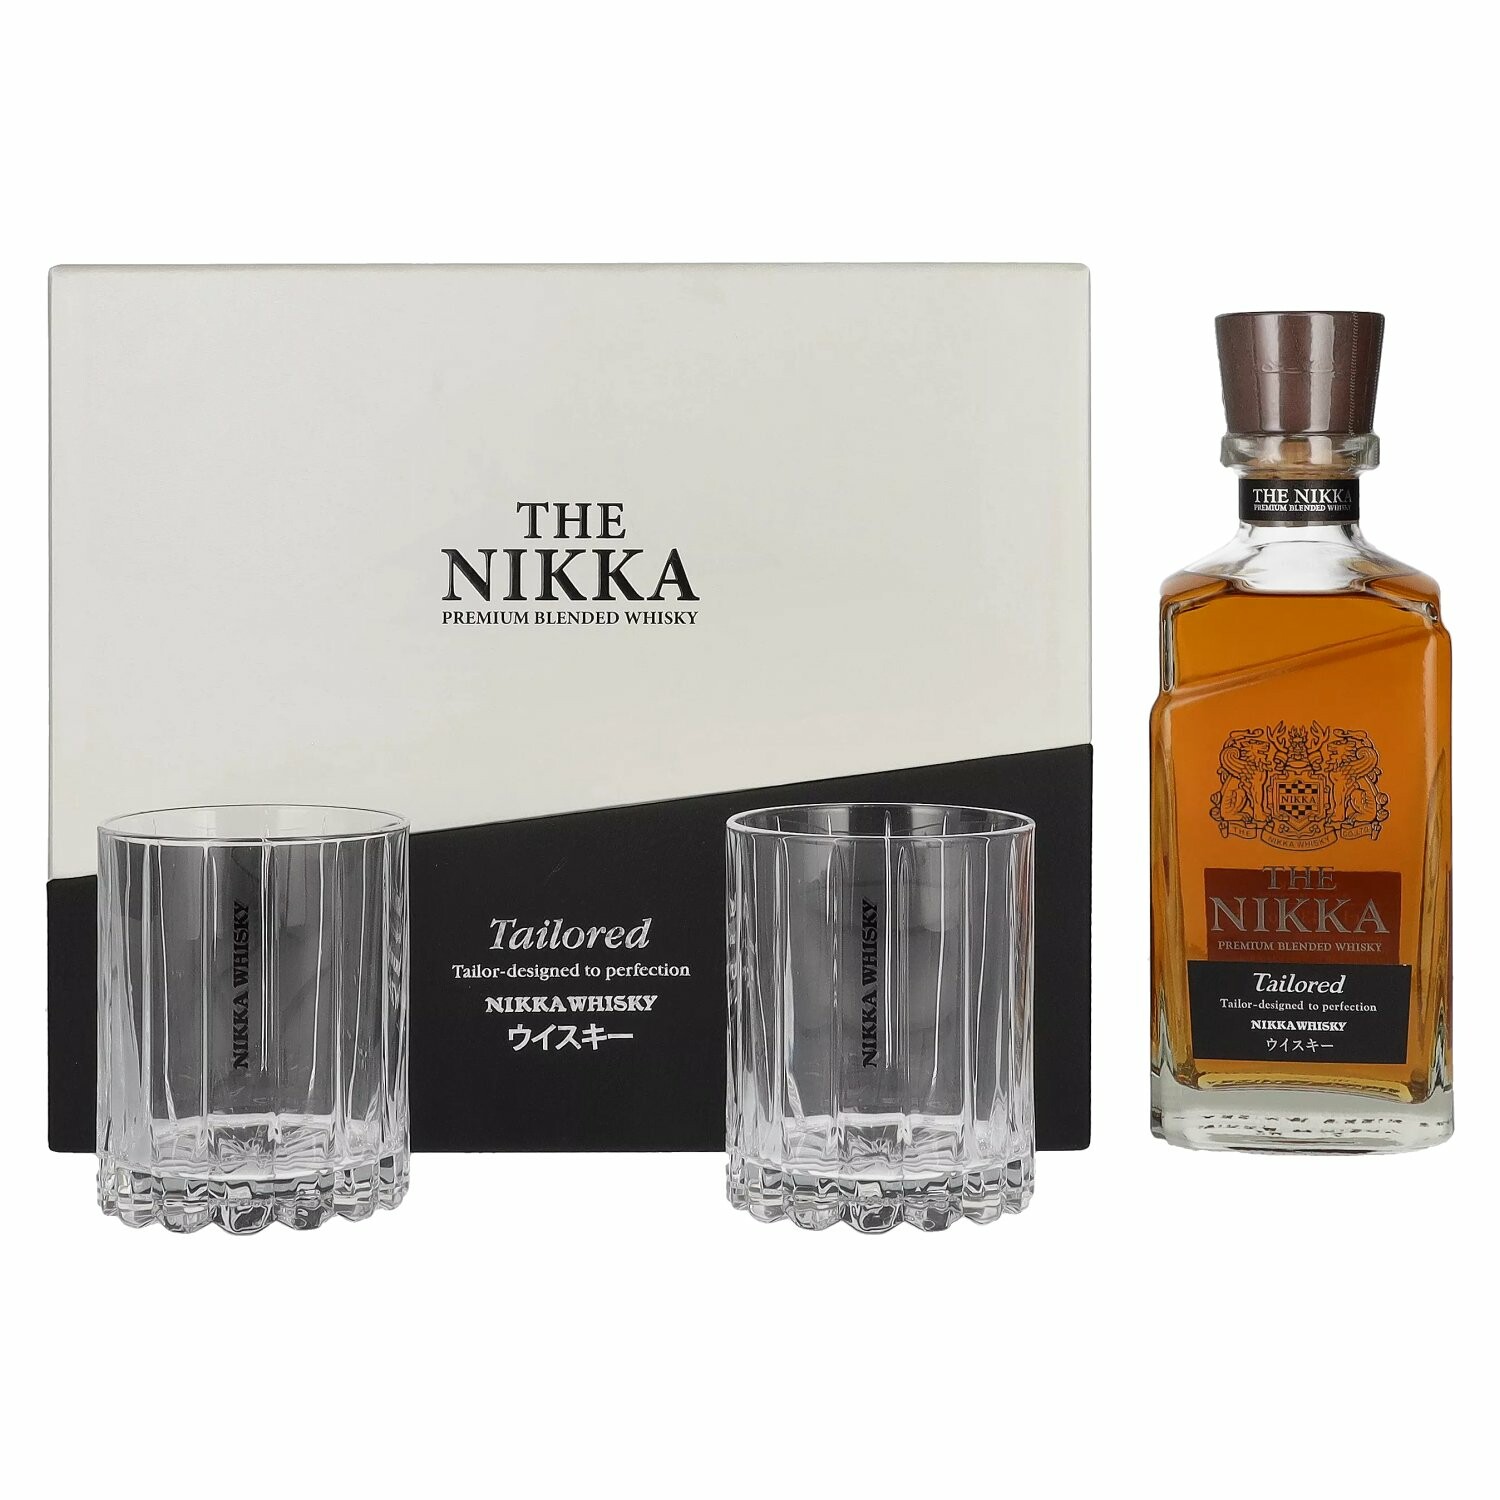 Nikka THE NIKKA Tailored Premium Blended Whisky 43% Vol. 0,7l in Giftbox with 2 glasses